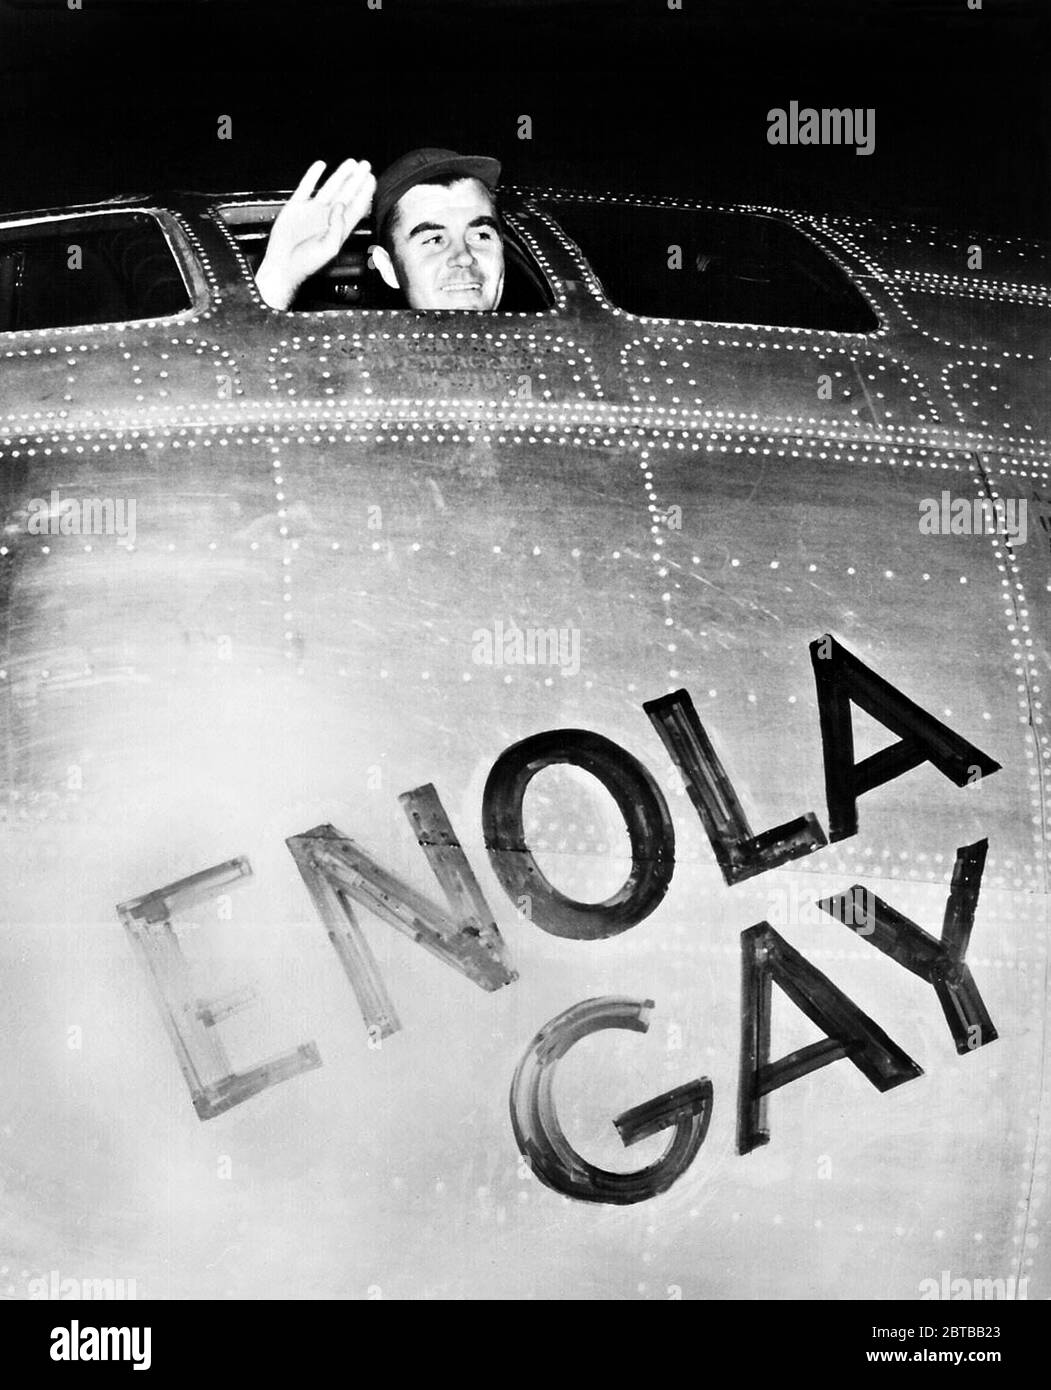 1945 , 6 august , Tinian , Northen Mariana Islands, British Commonwelth : The american Colonel PAUL Warfield TIBBETS Jr. ( 1915 - 2007 ), pilot of Boing B-29 ENOLA GAY  , the airplane that dropped the ATOMIC BOMB on HIROSHIMA ( Japan ). In this photo salute just before the takeoff on Hiroshima . Photo by official U.S. Signal Corps . - ATTACCO ATOMICO NUCLEARE - NUCLEAR ATTACK - WORLD WAR II - WWII - SECONDA GUERRA MONDIALE - foto storiche storica - HISTORY PHOTOS - Stati Uniti d'America - bombardamento - aviazione - BOMBA ATOMICA -  bomb - attacco aereo - USA - GIAPPONE - GUERRA DEL PACIFICO - Stock Photo